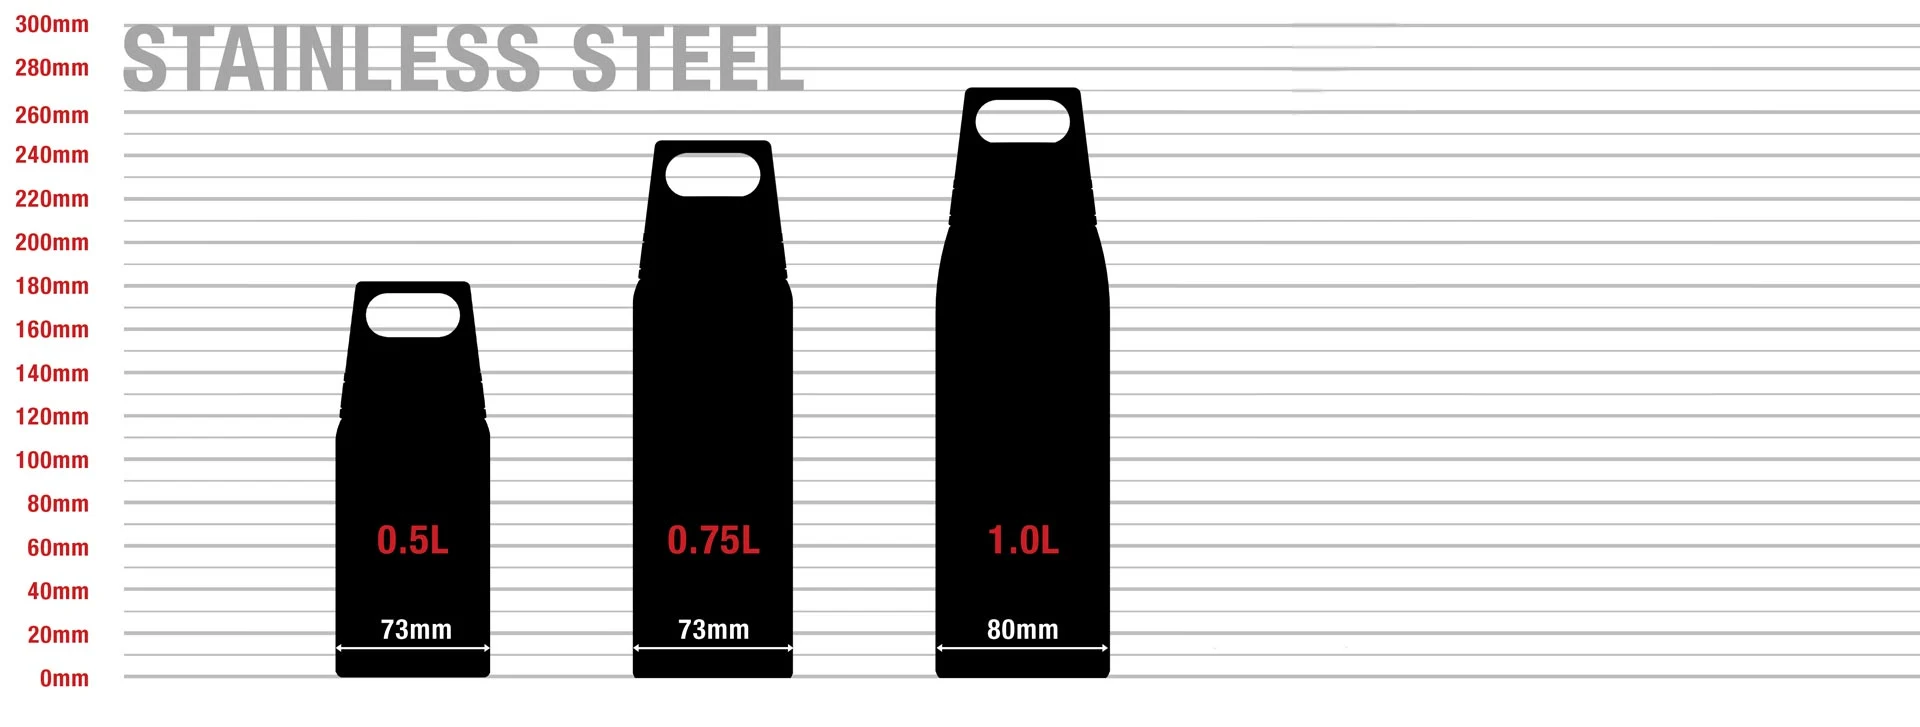 SIGG Stainless Steel Shield Dimensions